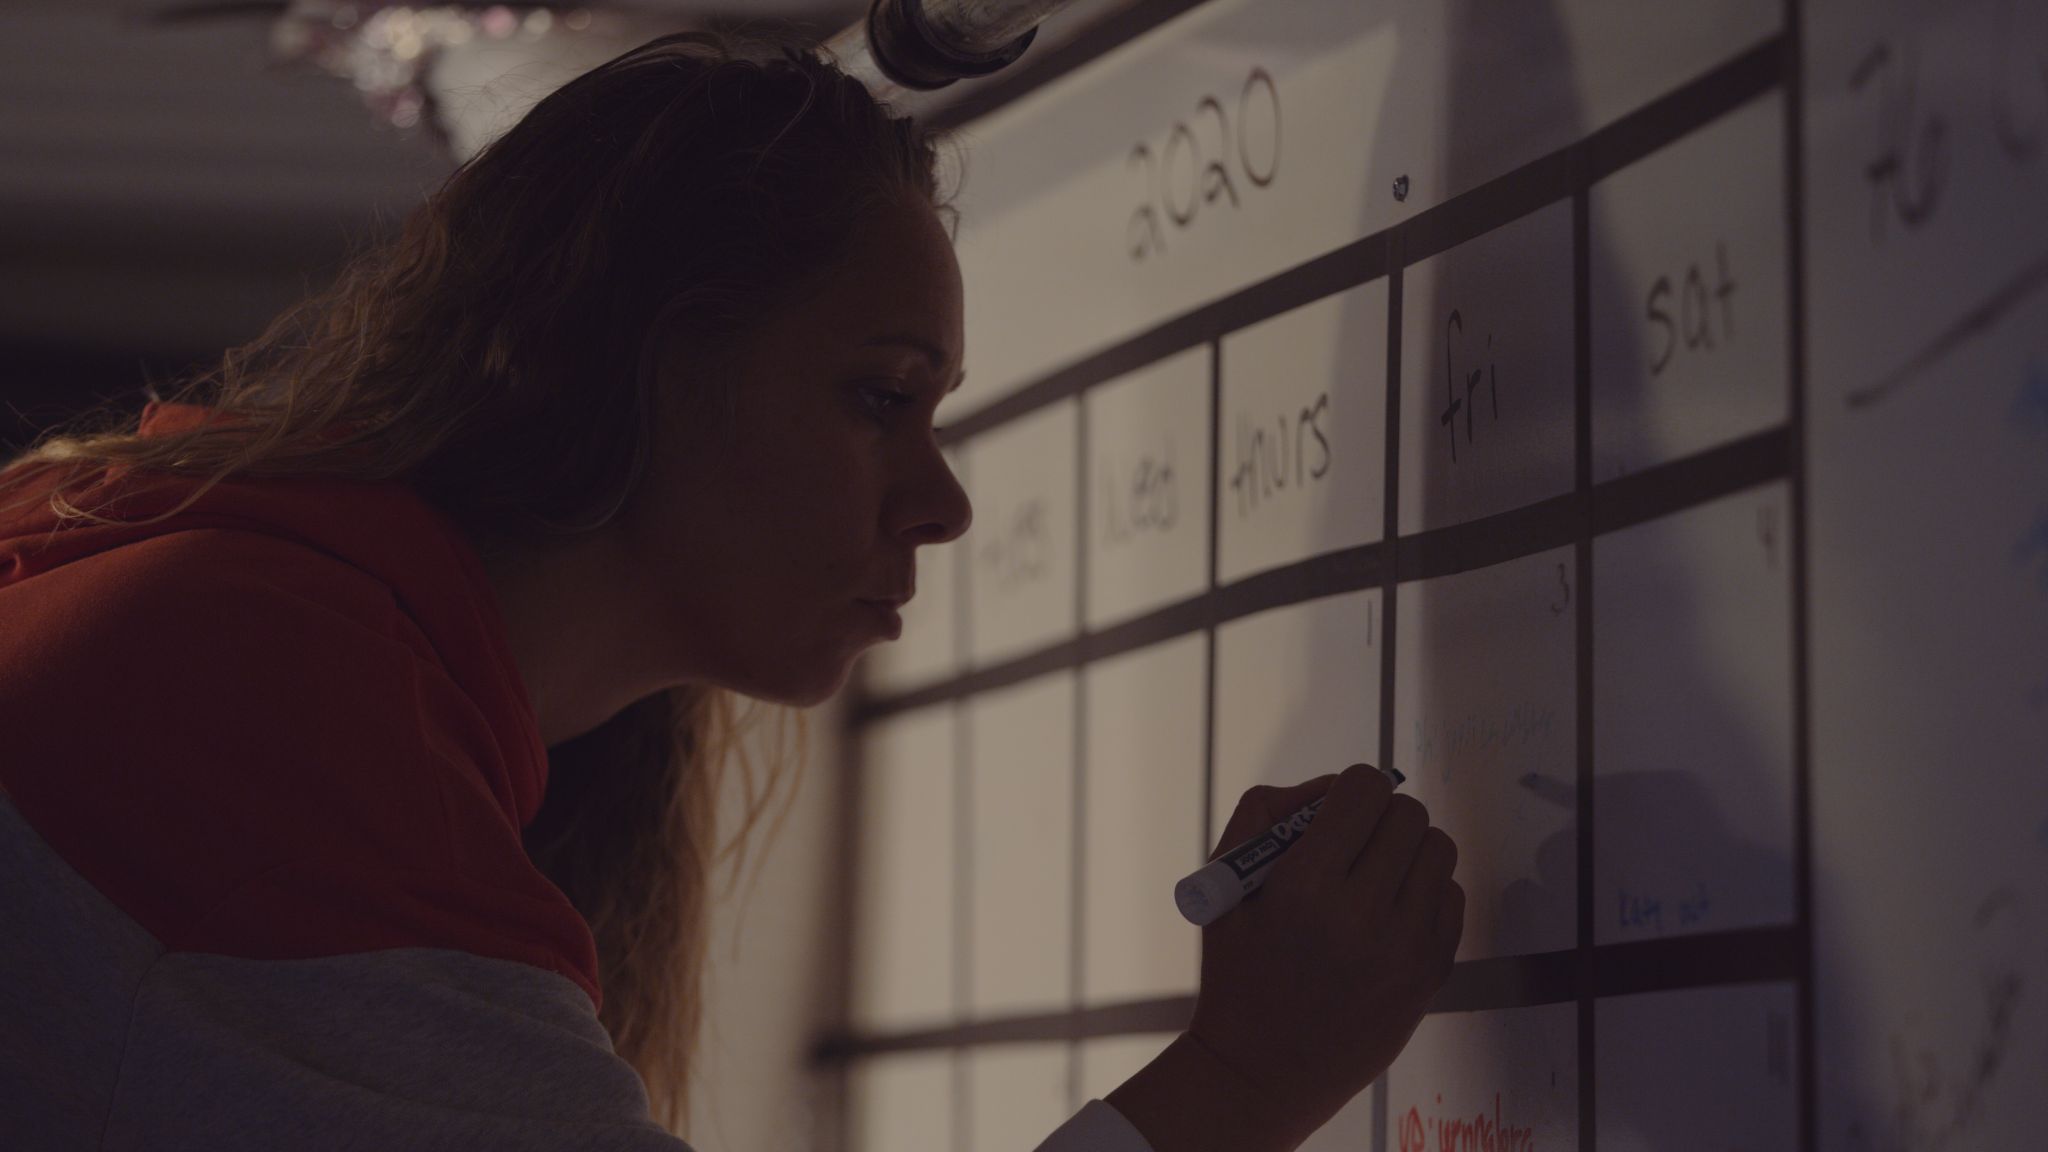 Side profile of woman writing something in a calendar on a white board